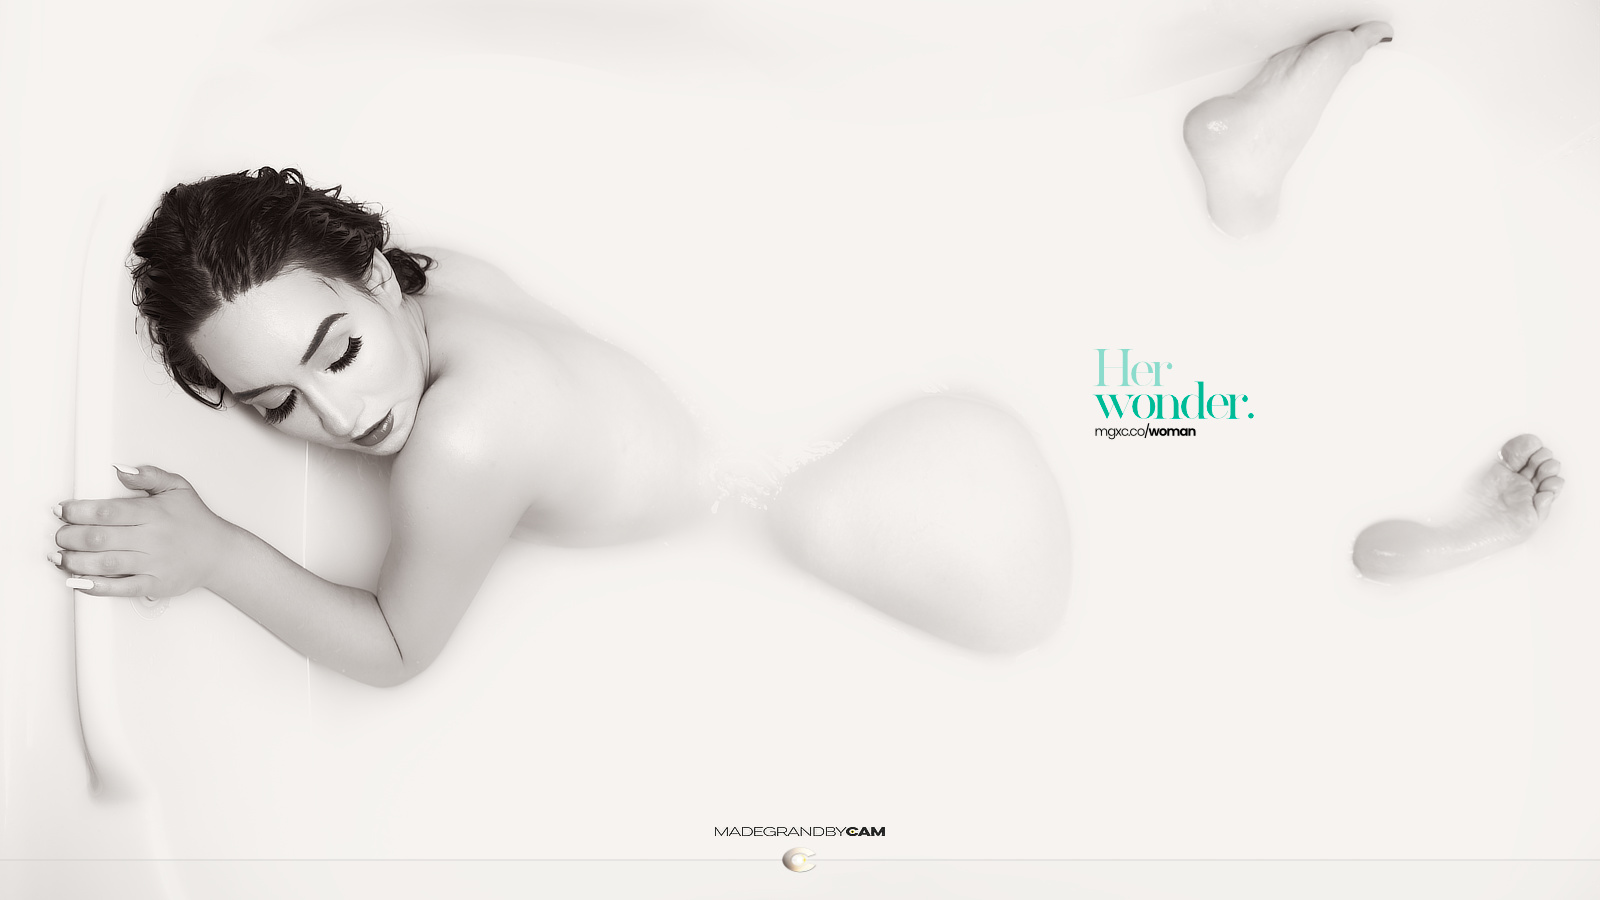 Celebrate Her Wonder with Sensual Milk Bath Portrait Photography Experience by Cam Evans, Signature Woman